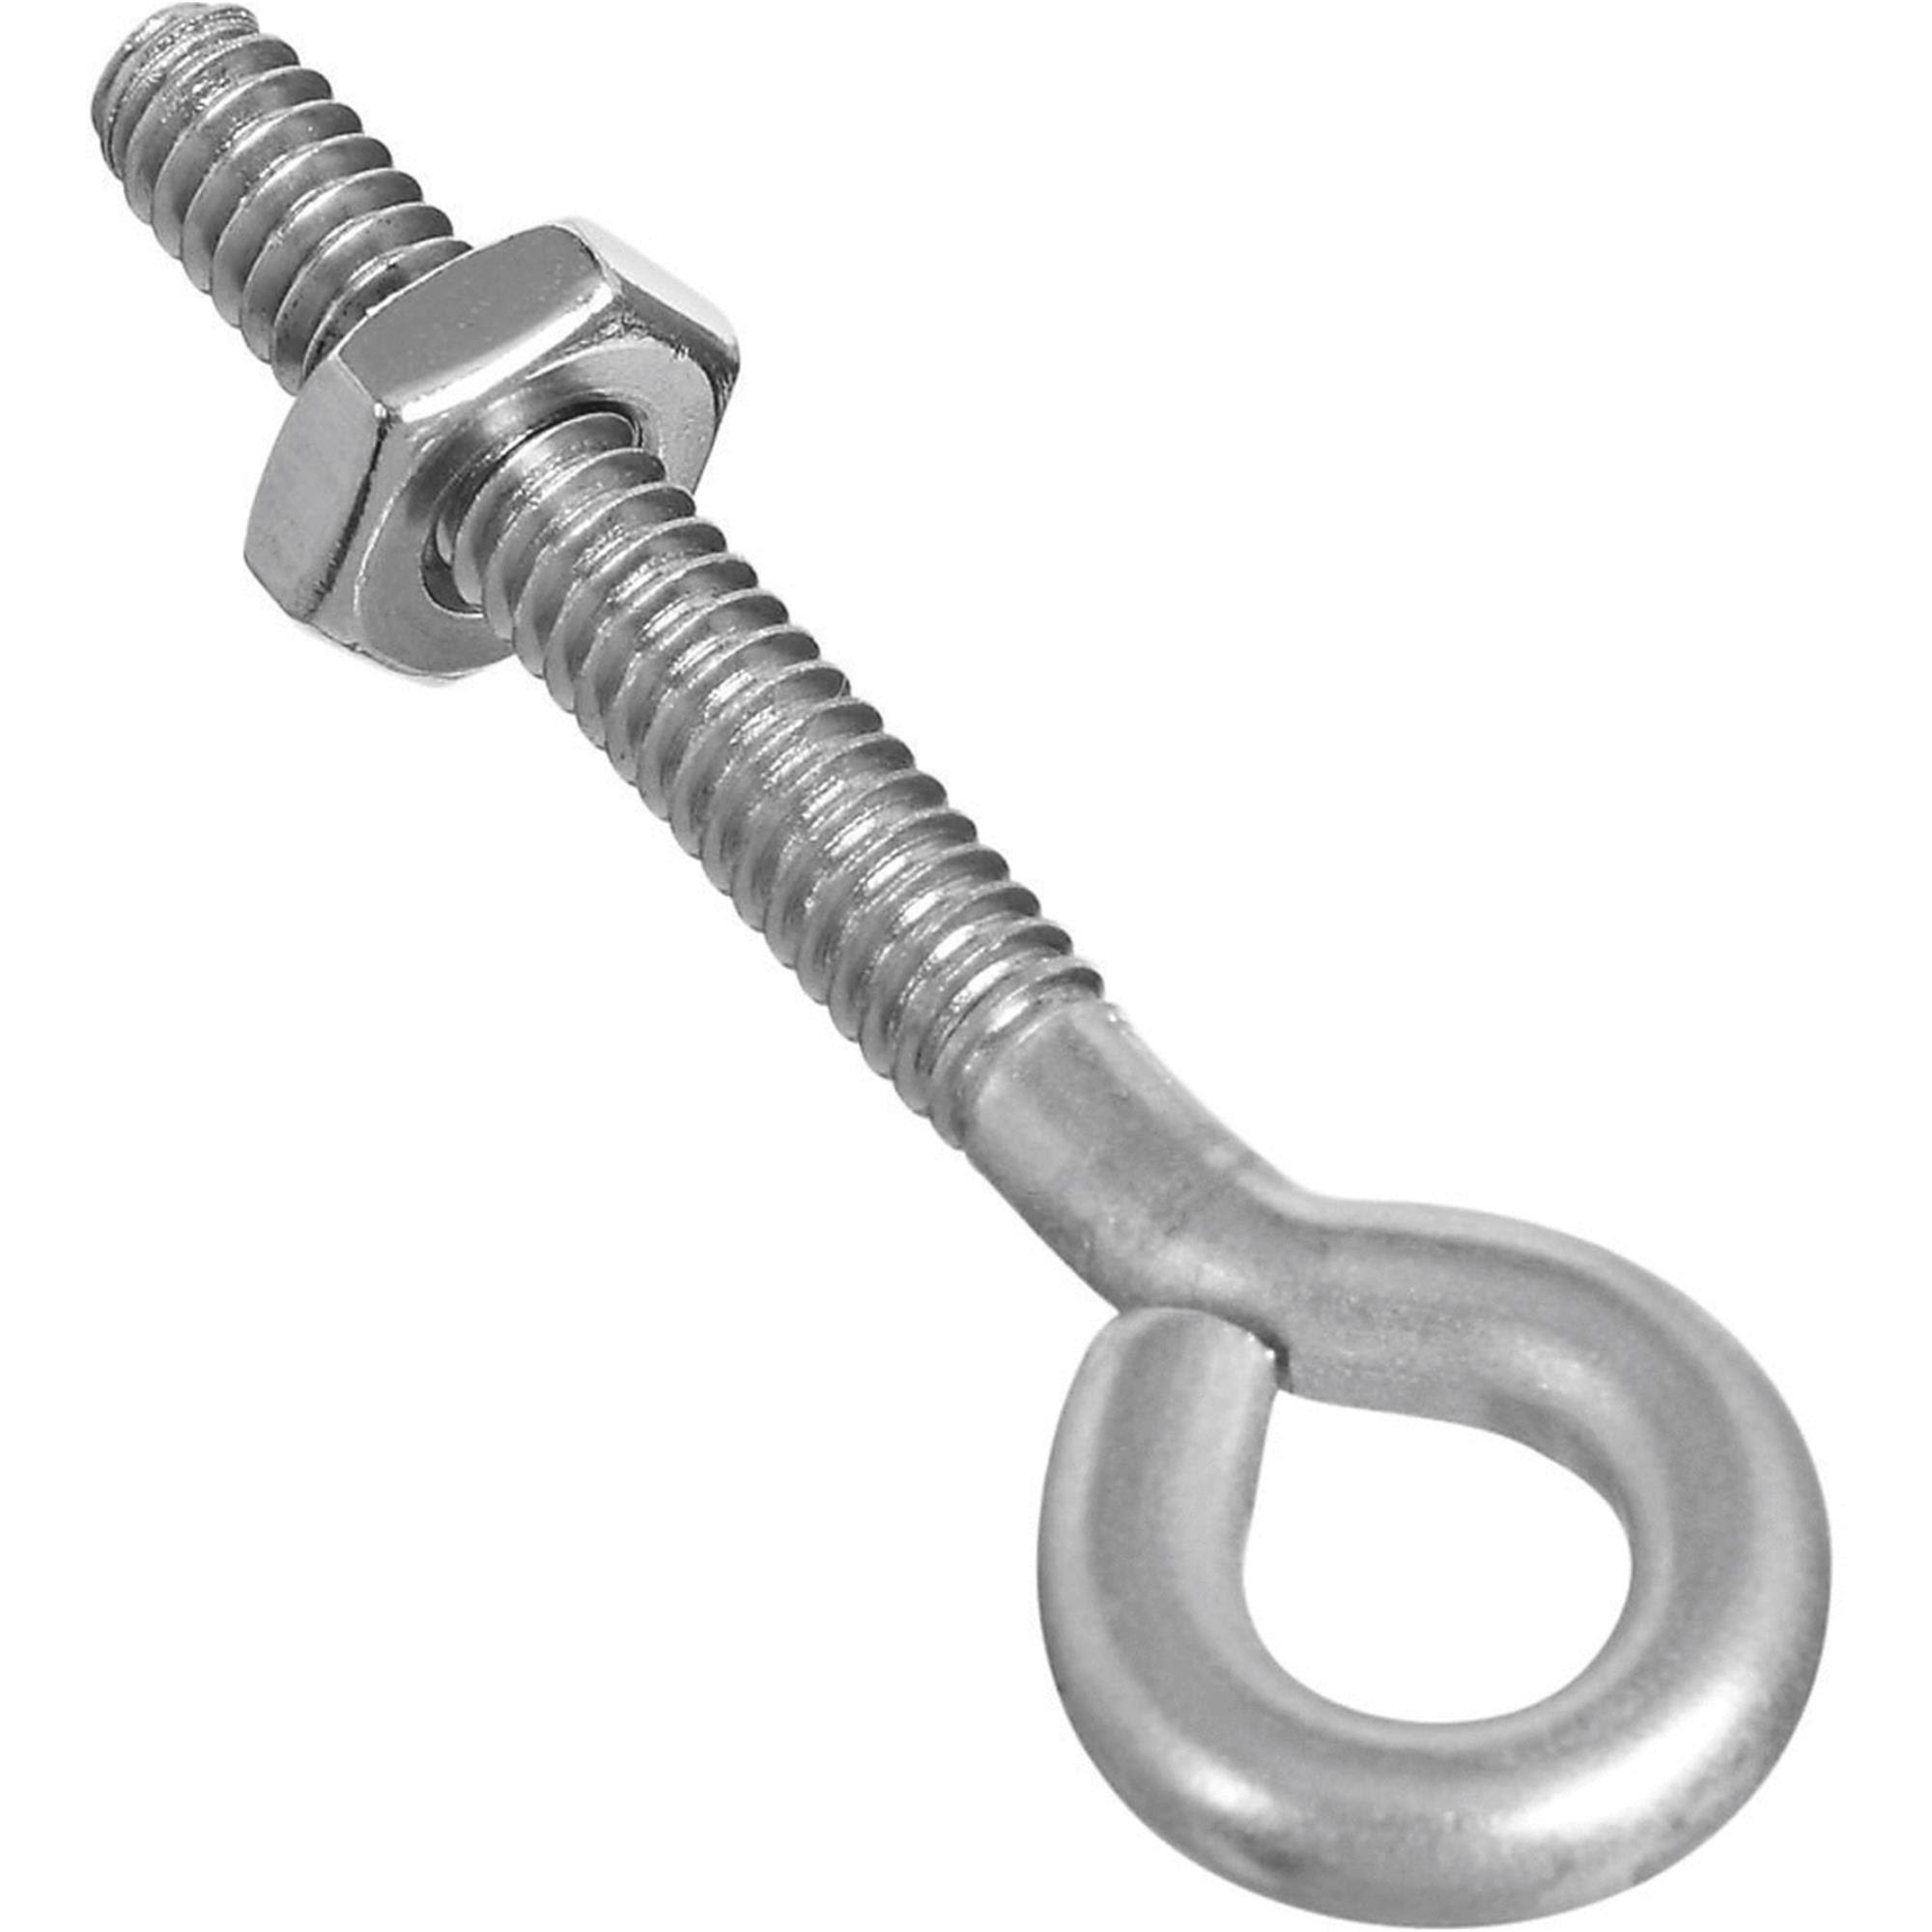 Stanley 2161bc Eye Bolt With Hex Nut - Stainless steel, 3/16"x2"